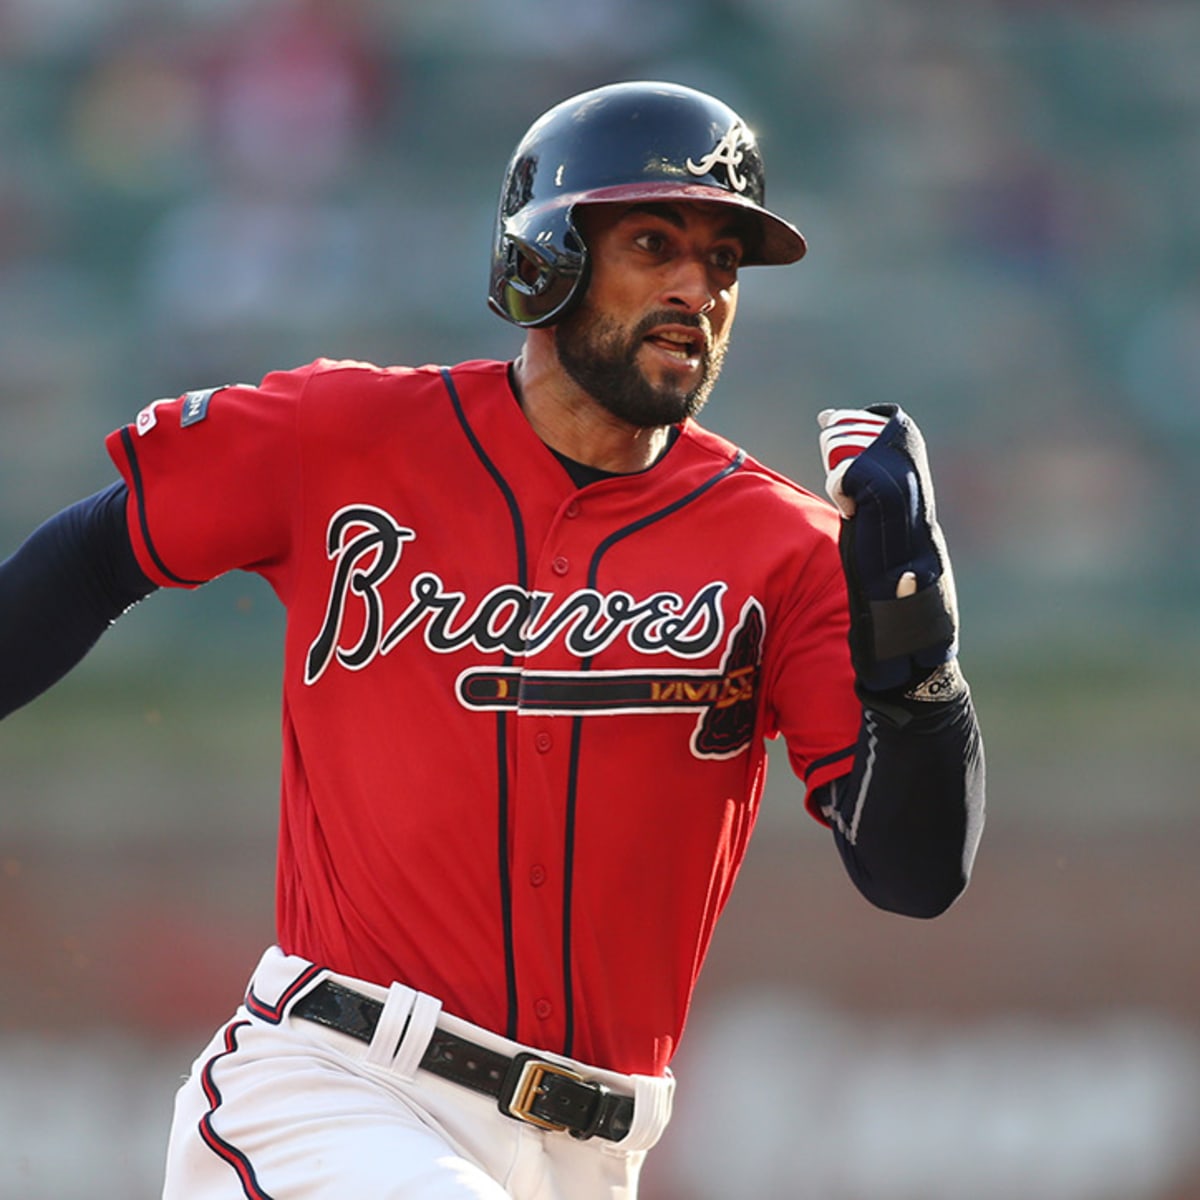 Nick Markakis retires from baseball after 15 seasons - Sports Illustrated